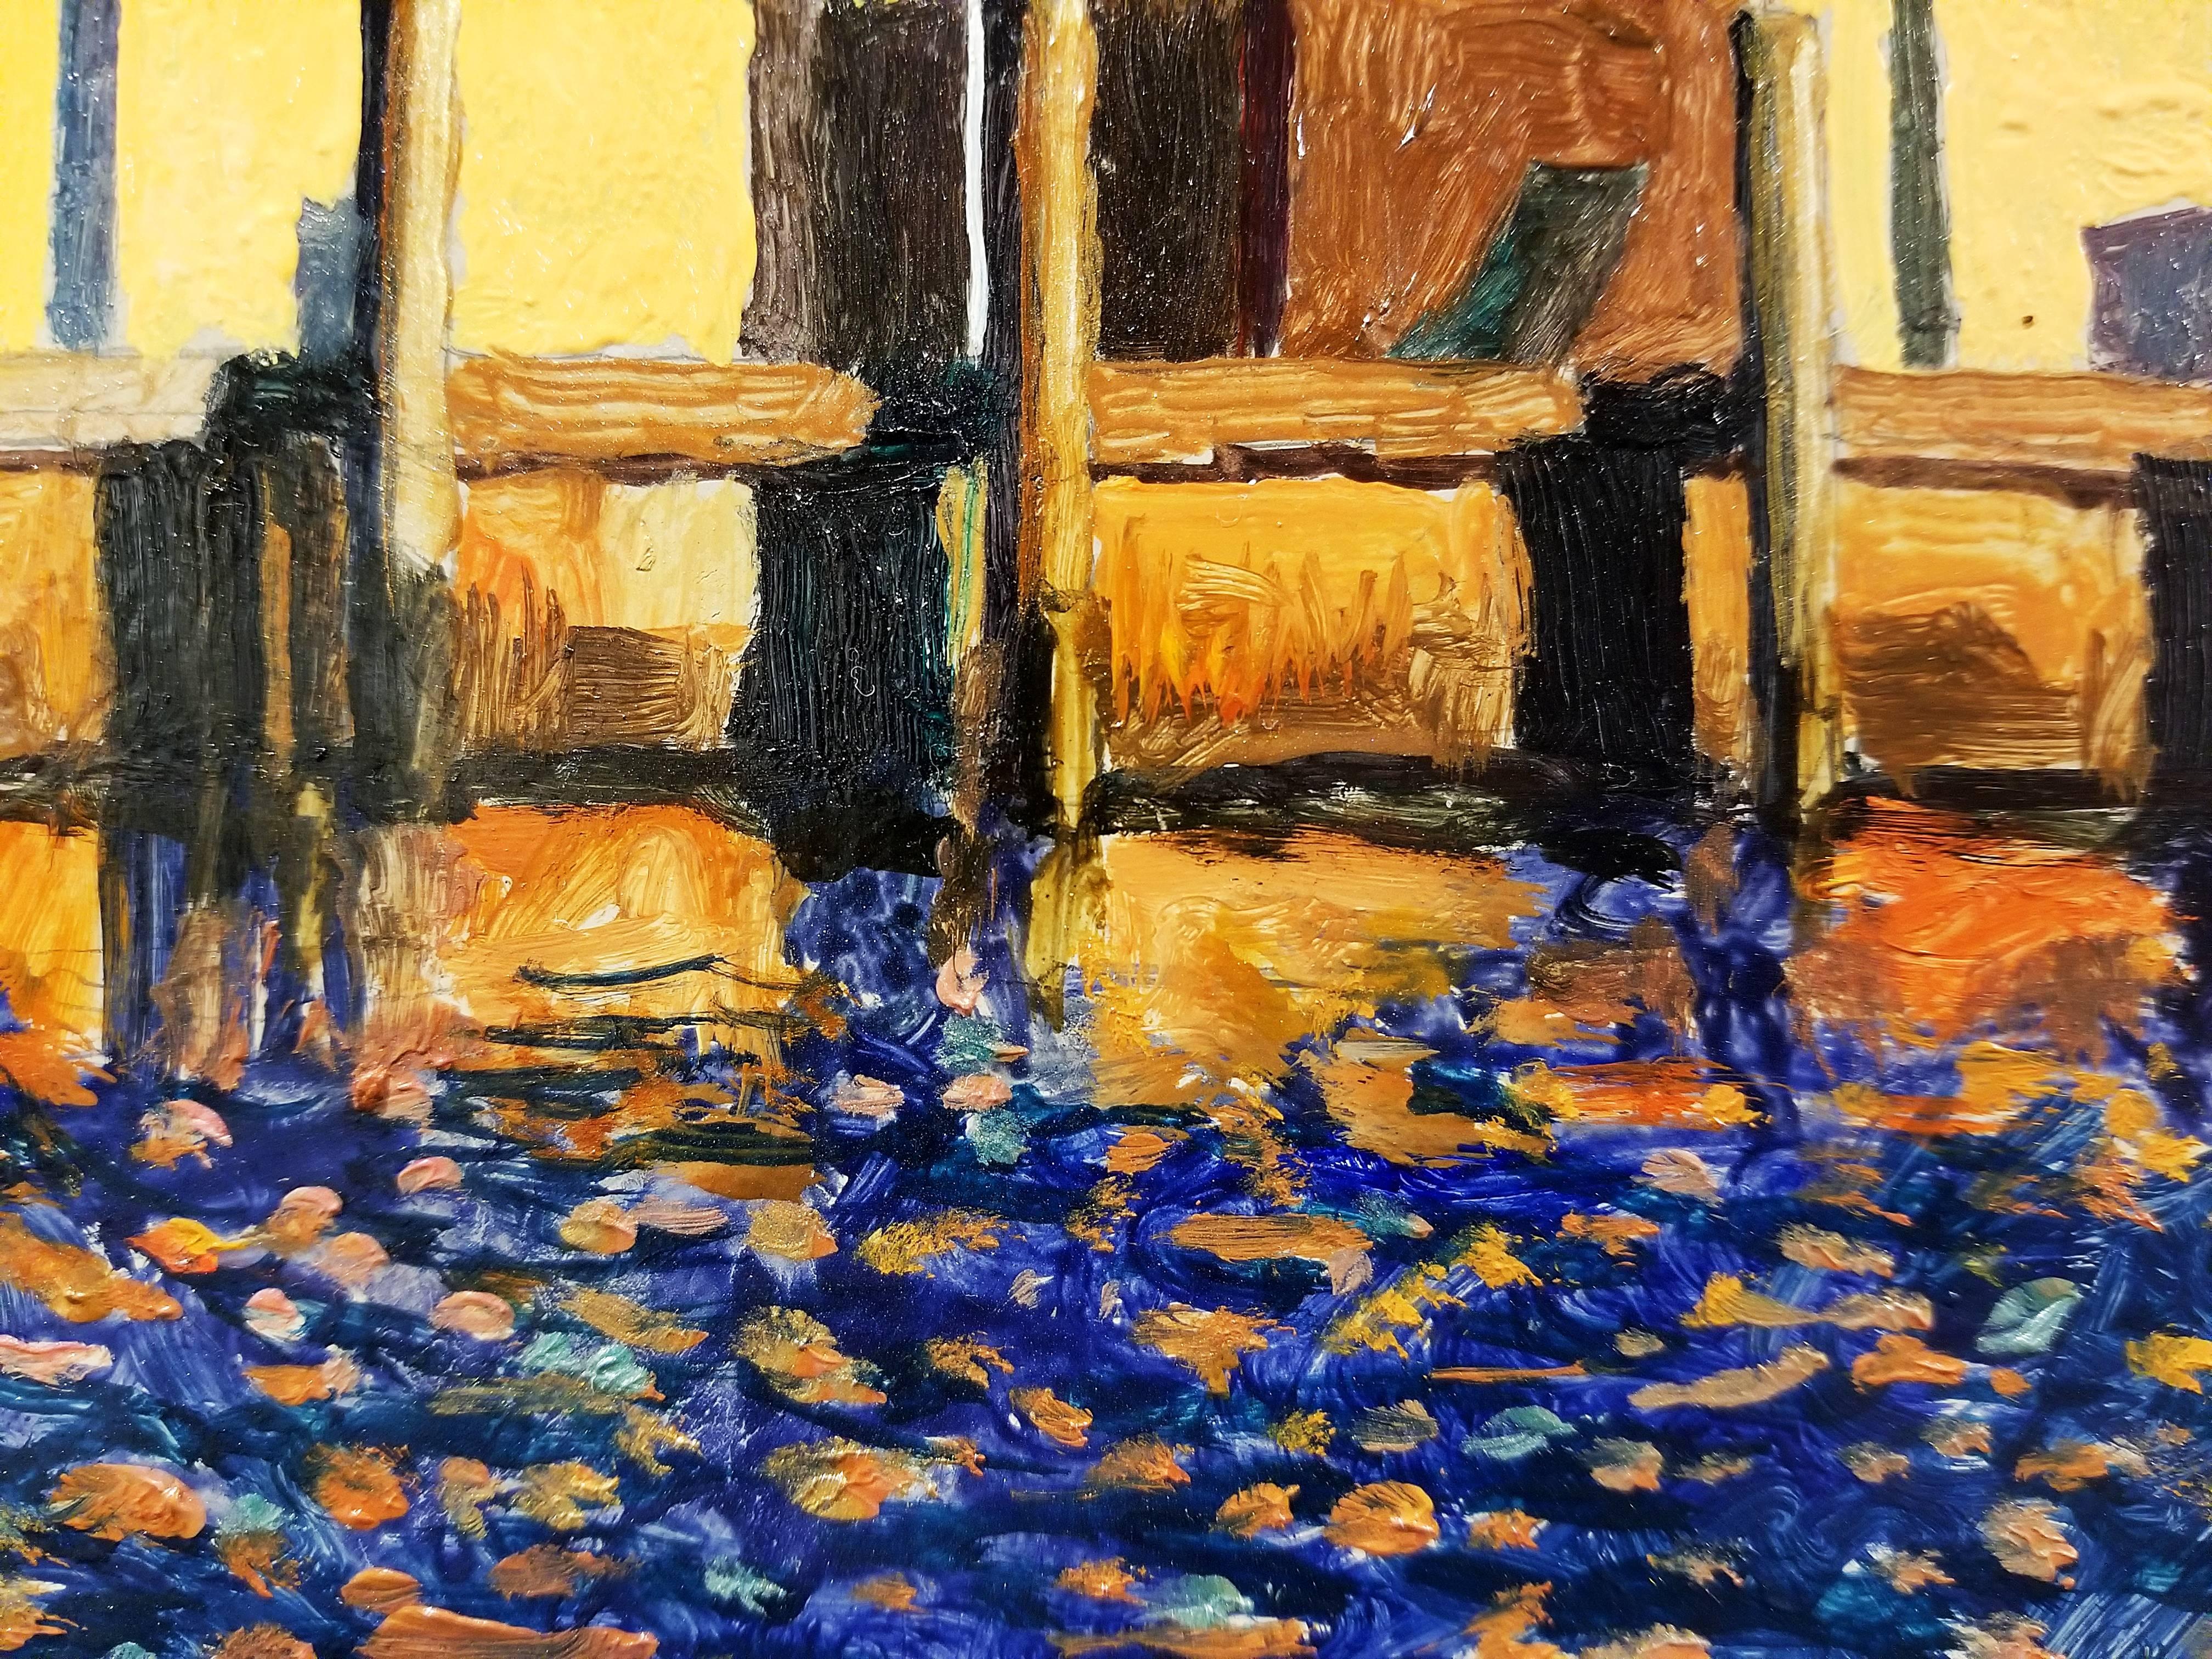 Ed's Dock, oil paint on linen - Painting by XAVIER RODÉS